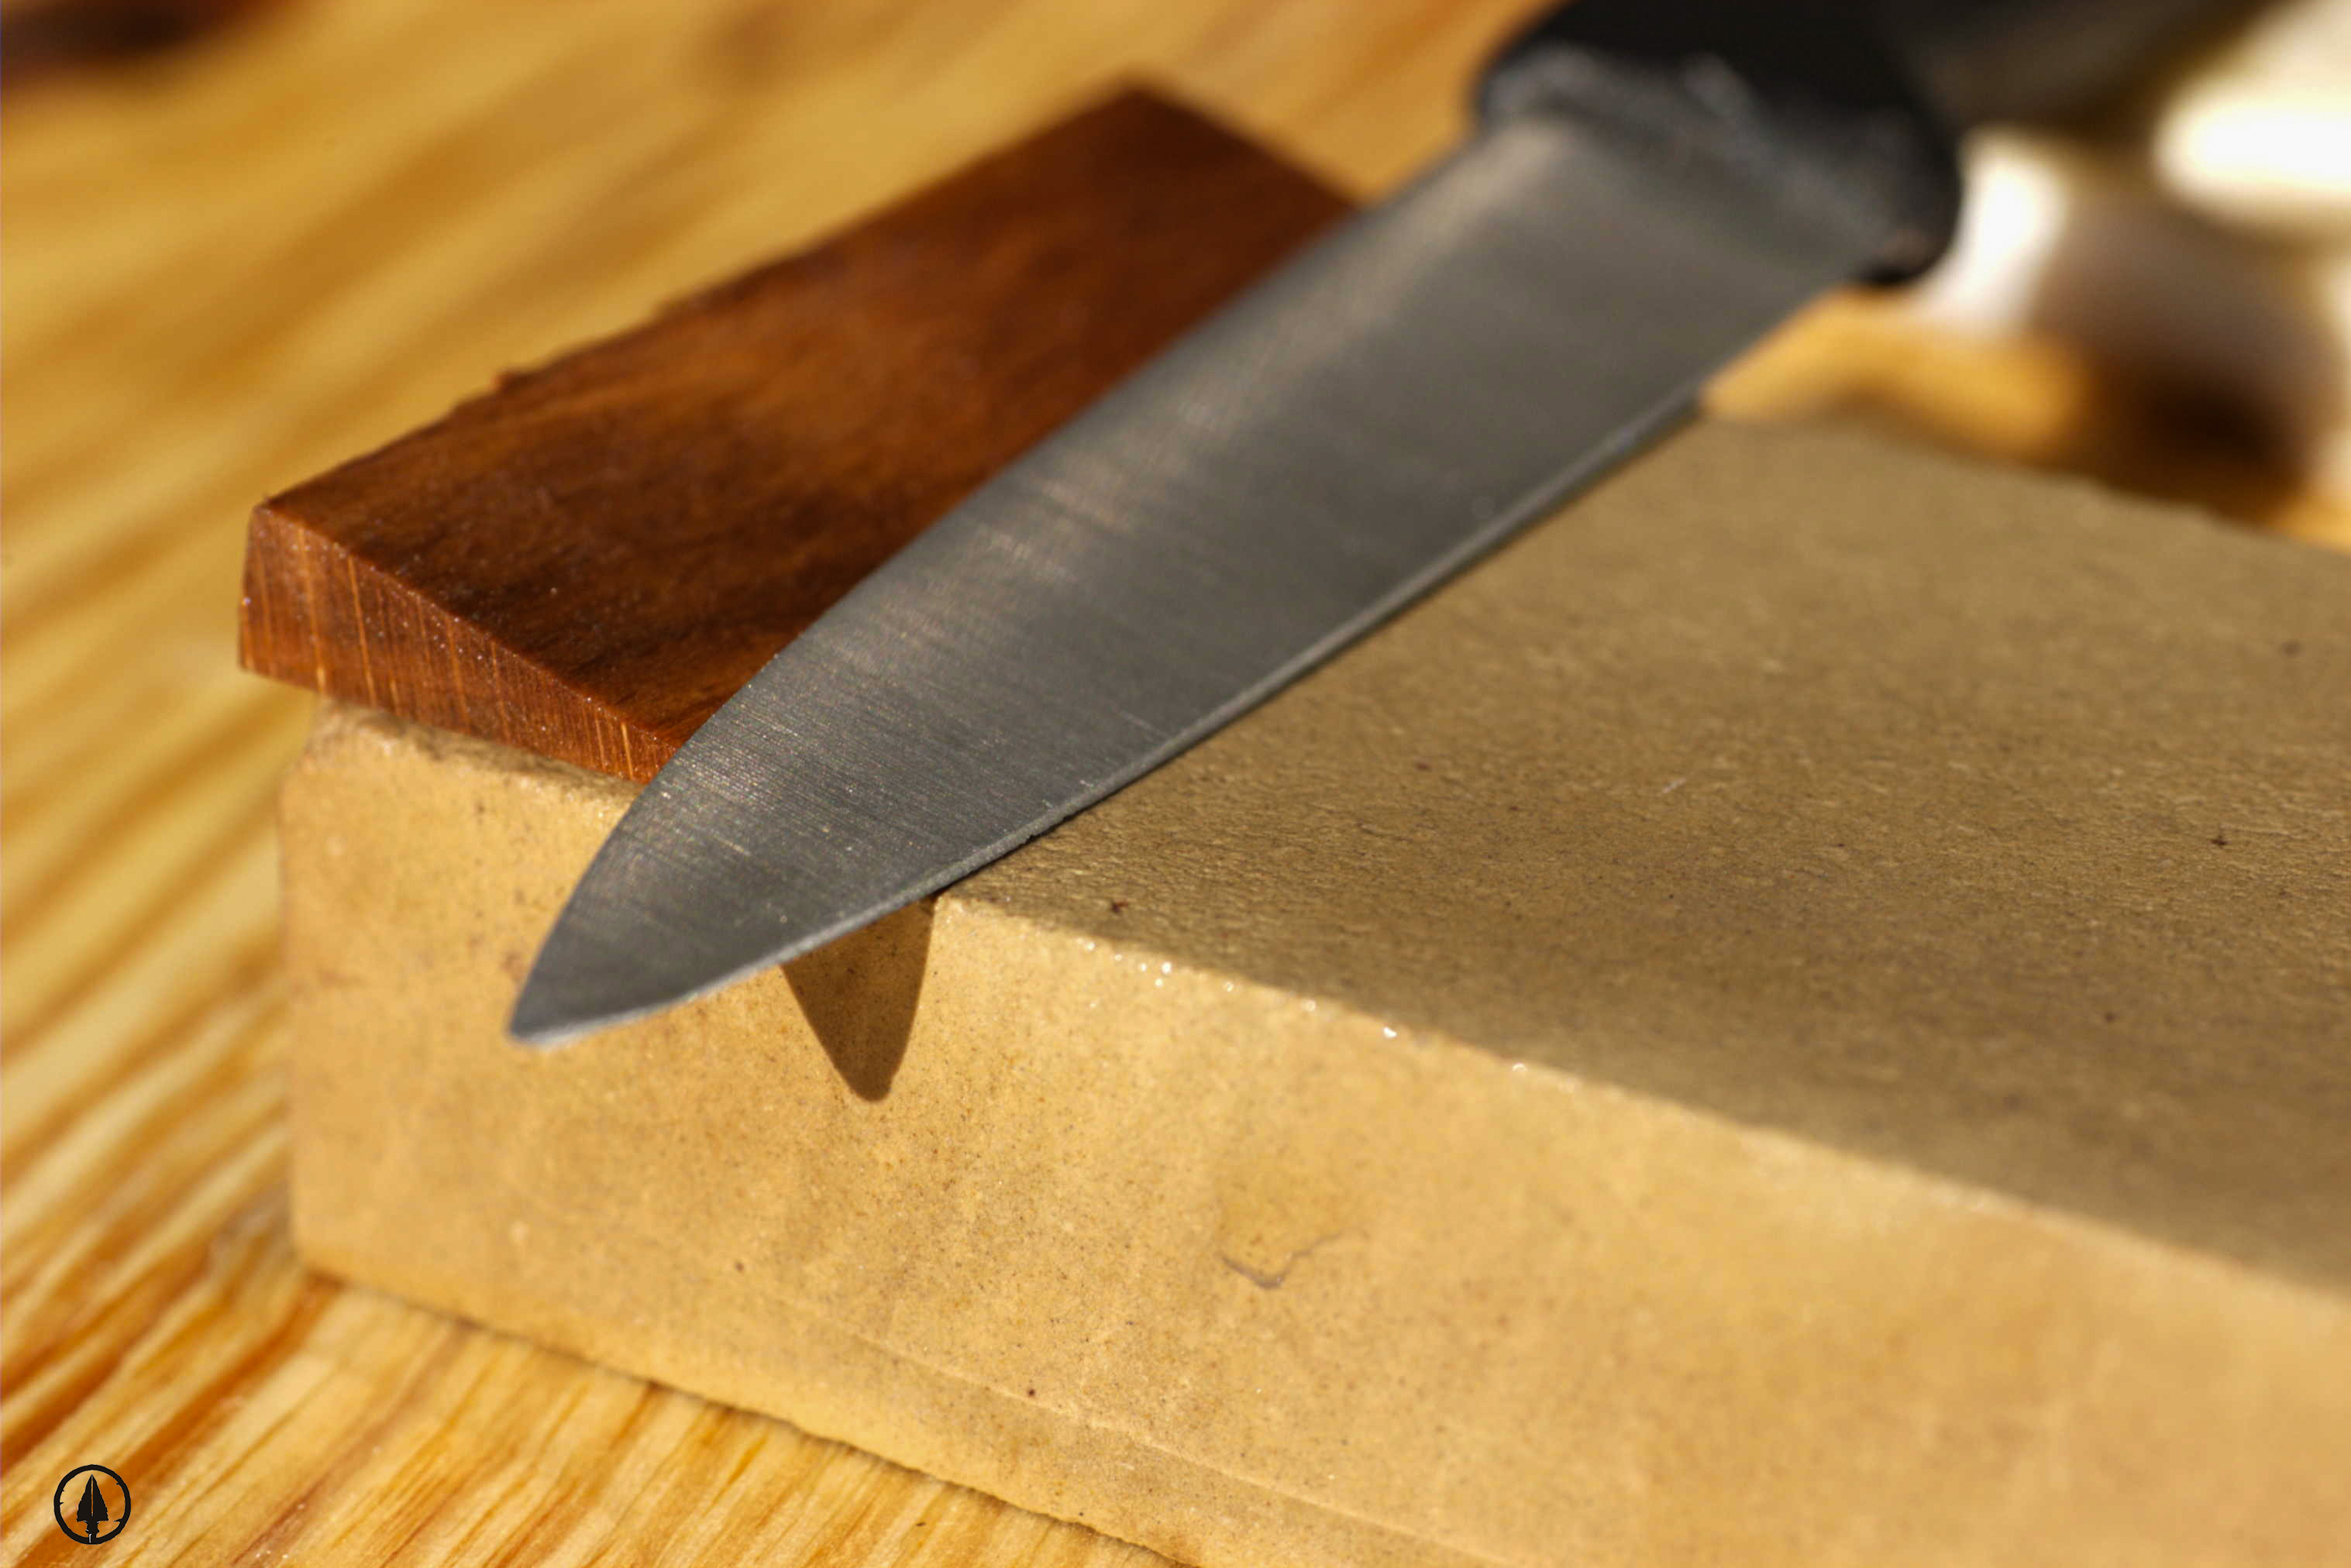 Sharpening a Hunting Knife on a Whetstone